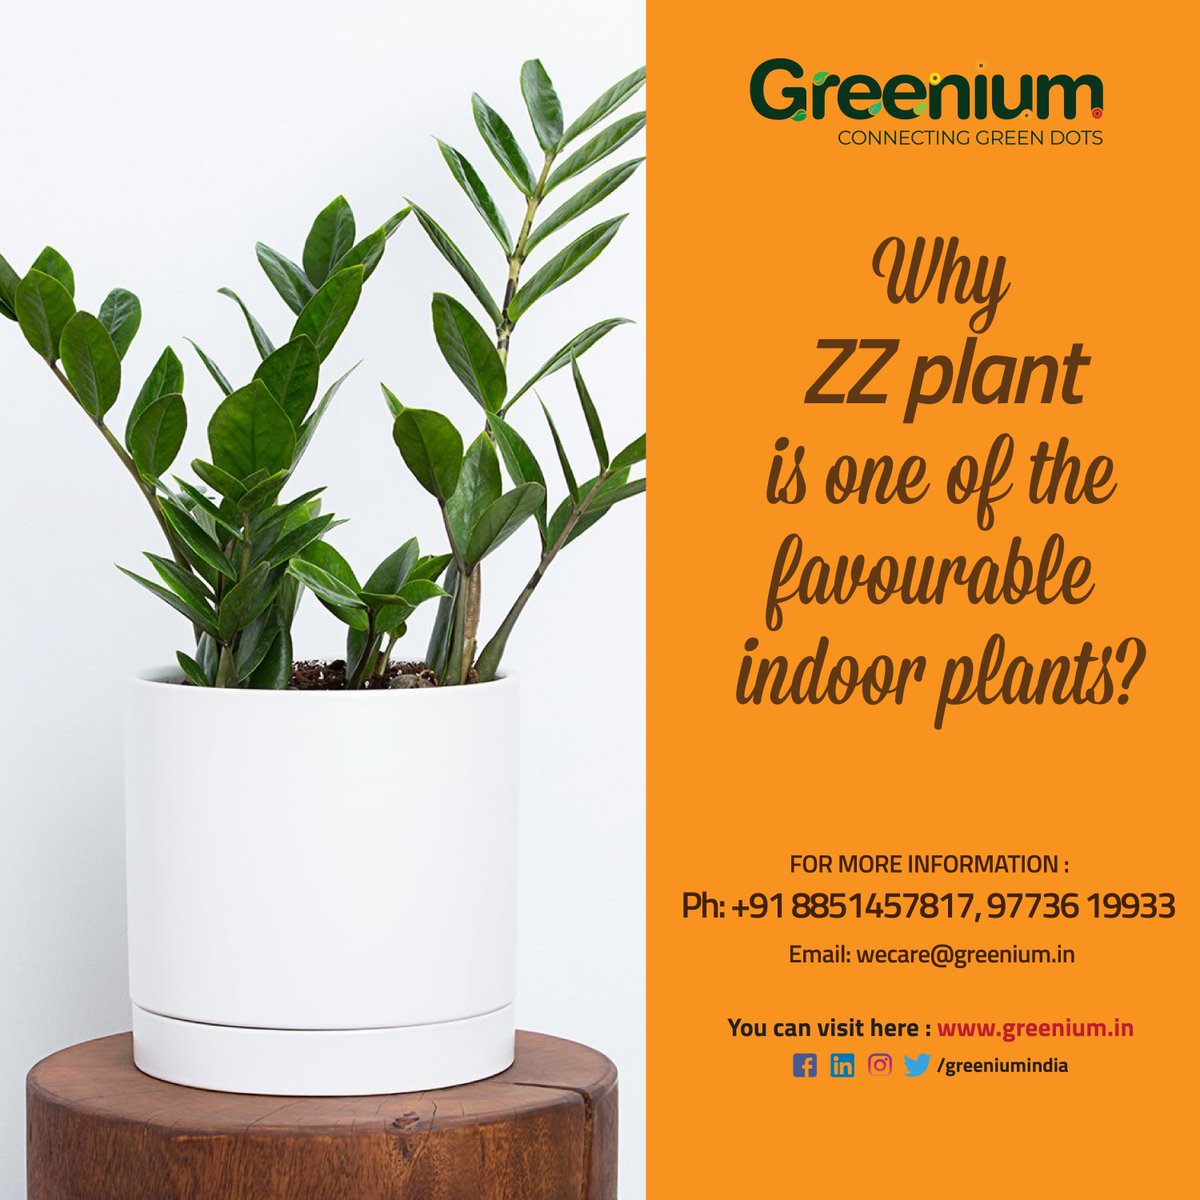 The lush and leafy ZZ plant is easy to grow and a favorite among houseplant growers.  For Order Contact us :- 9773619933 | 8851457817 

#GreeniumIndia #ZZplants #Plants #nutral #Lifeofplants #houseplants #indoorplants  #plantlove #green #crazyplants